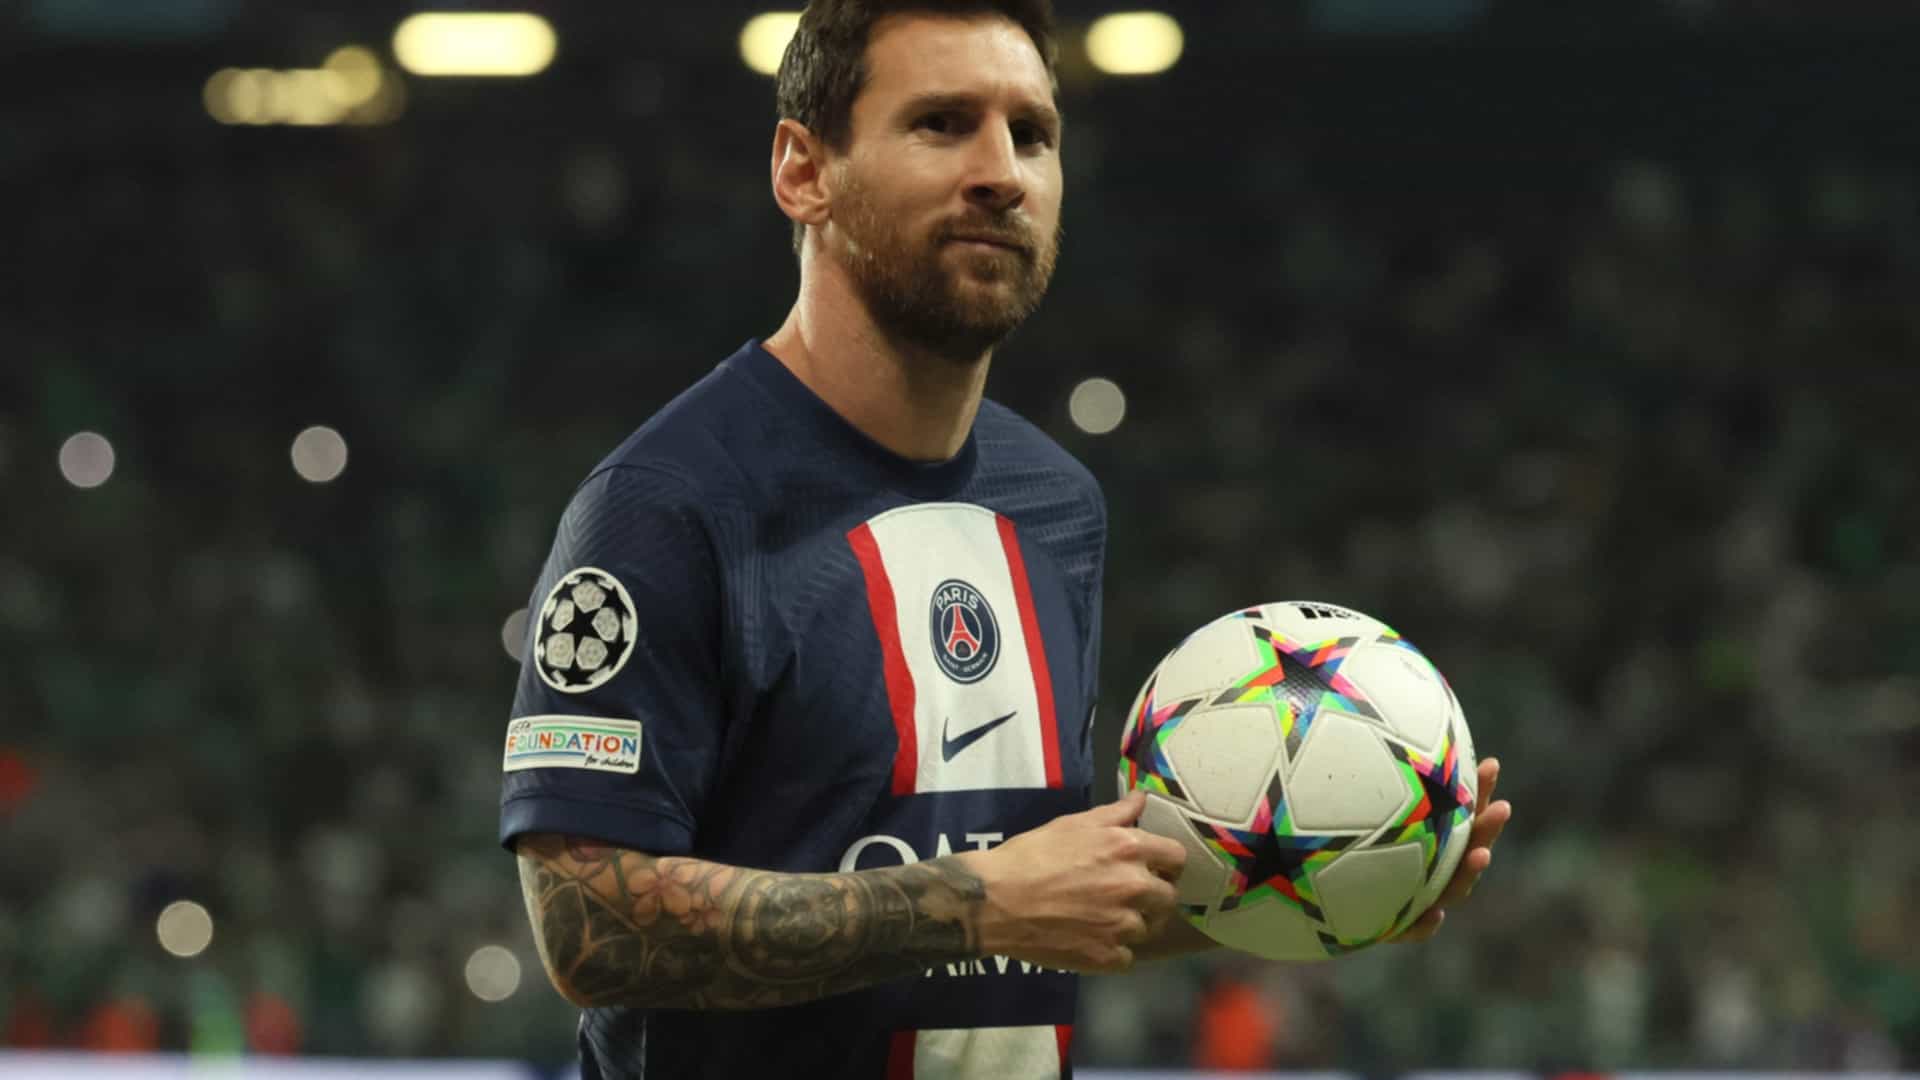 PSG survive scare against minnows Maccabi Haifa as Lionel Messi sets new Champions League record with Cristiano Ronaldo stuck in Europa League with Manchester United